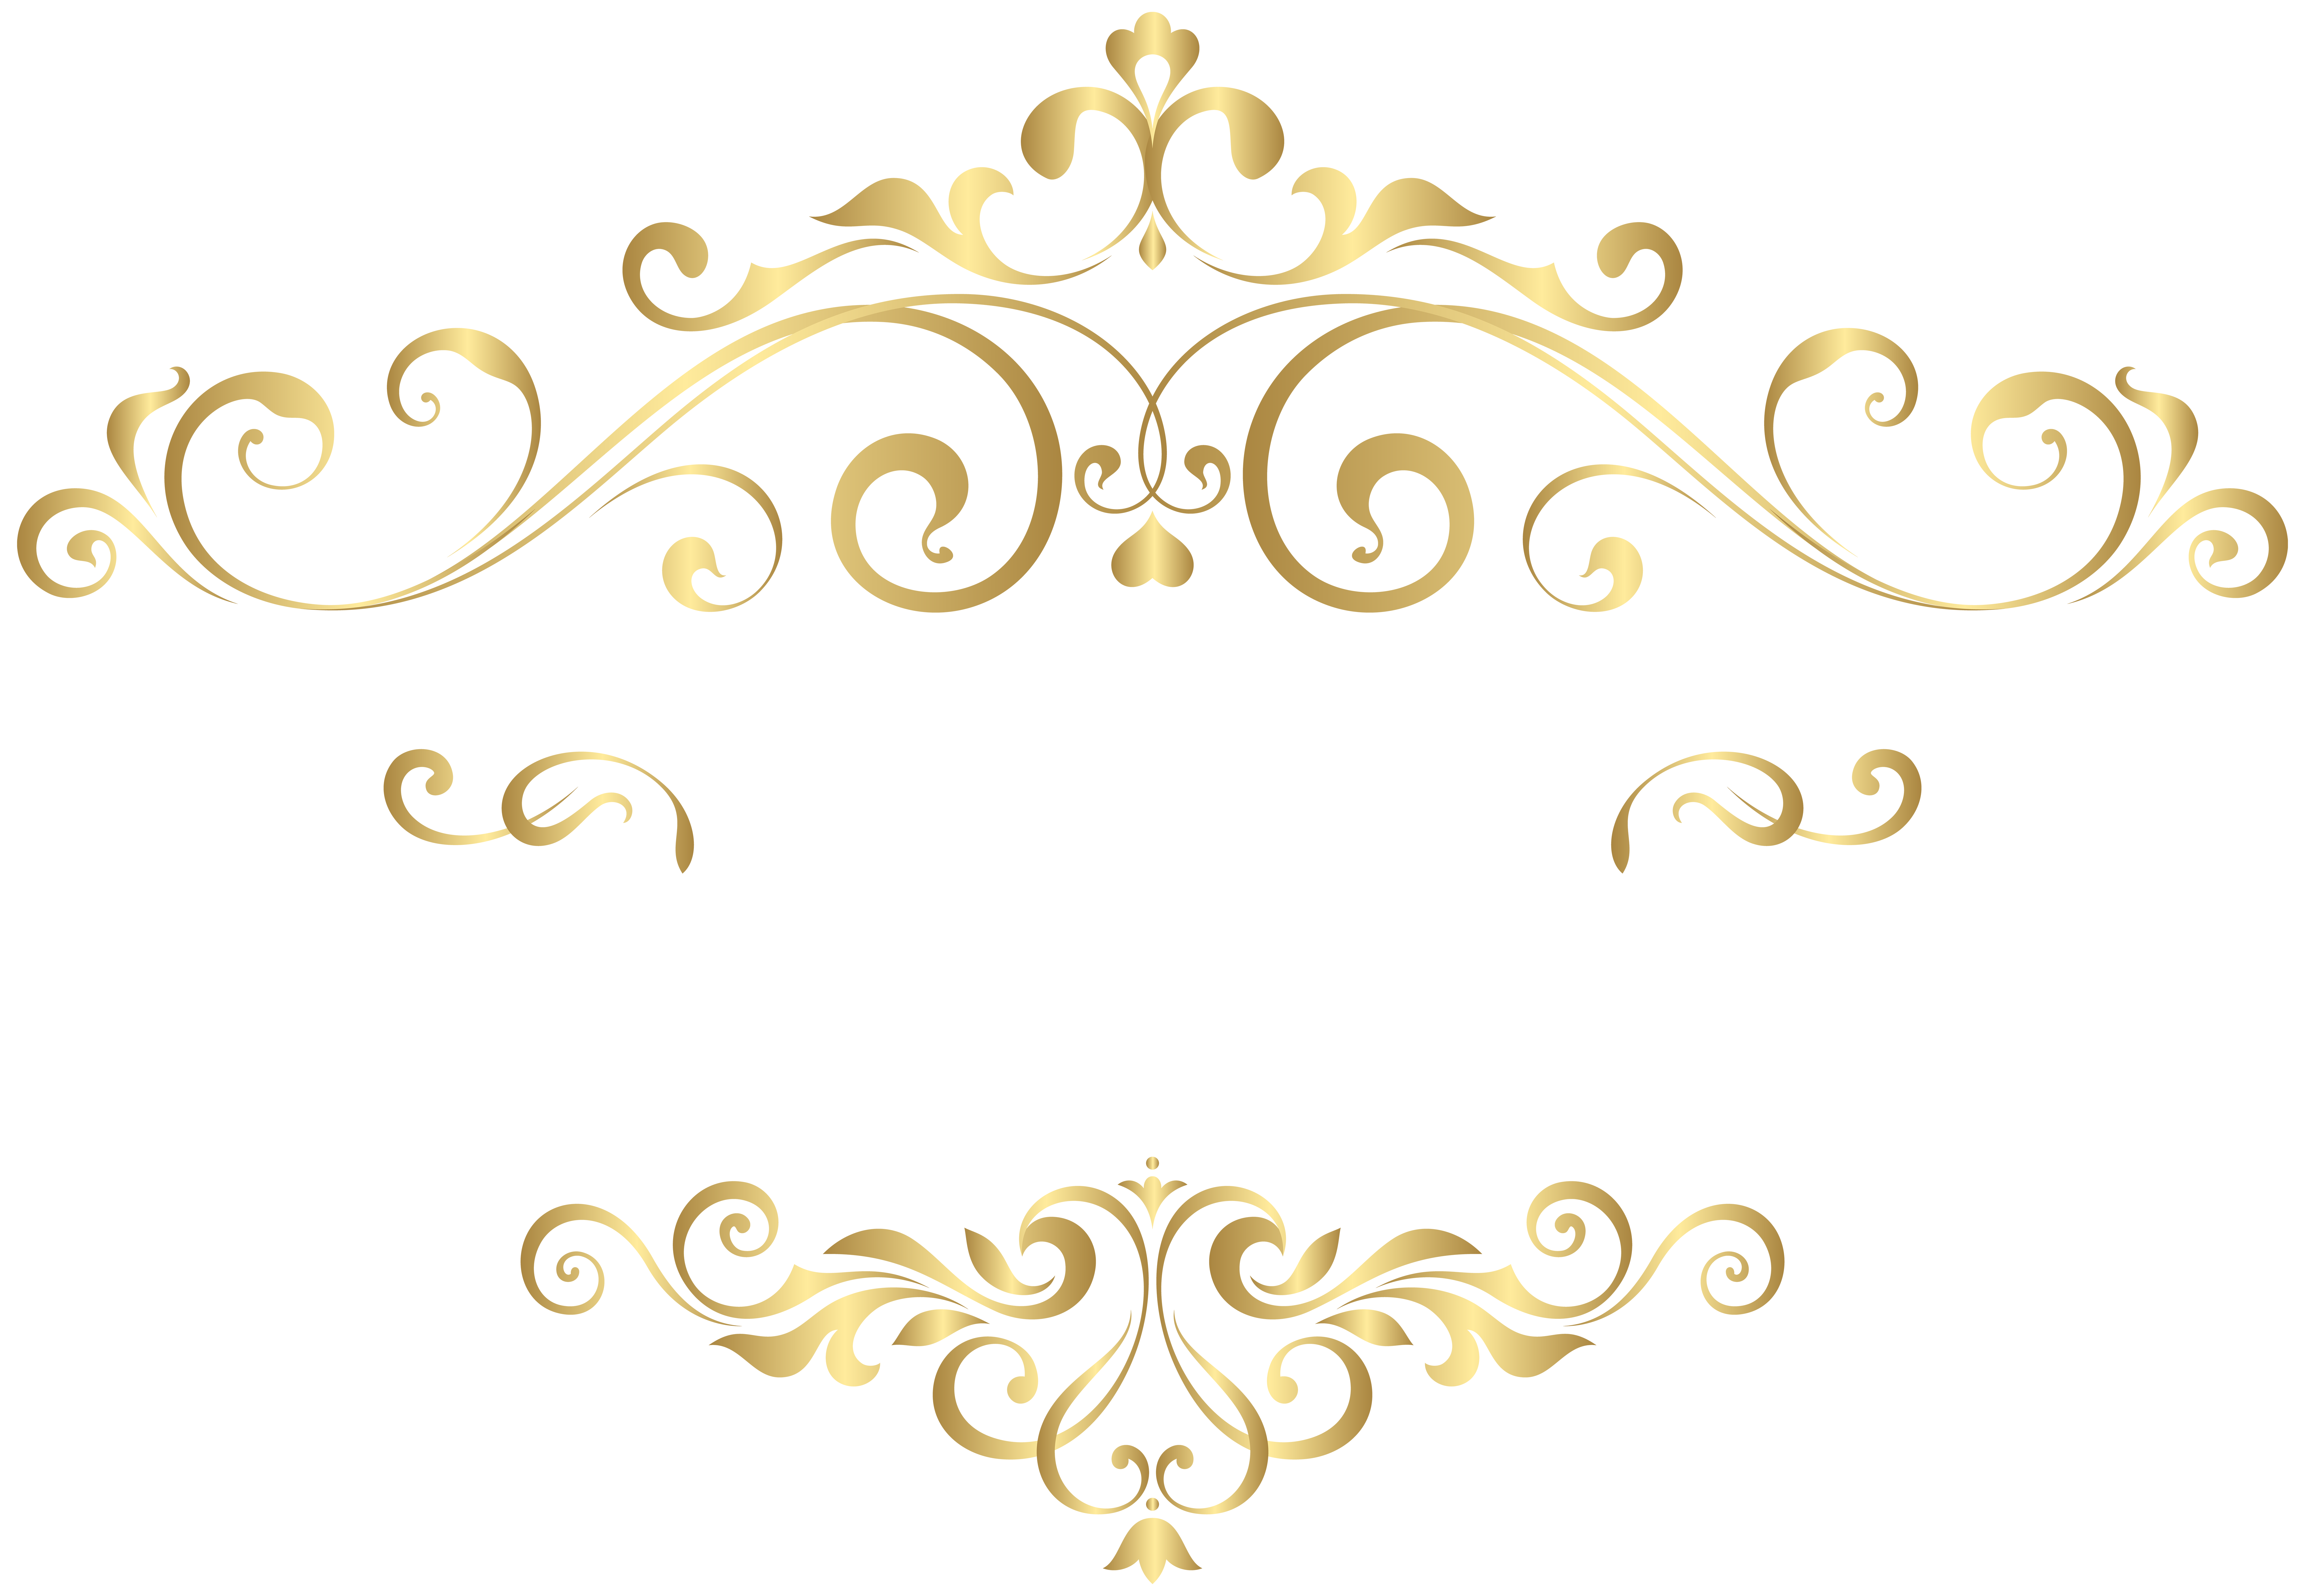 Png image gallery yopriceville. Decorative clipart decorative element